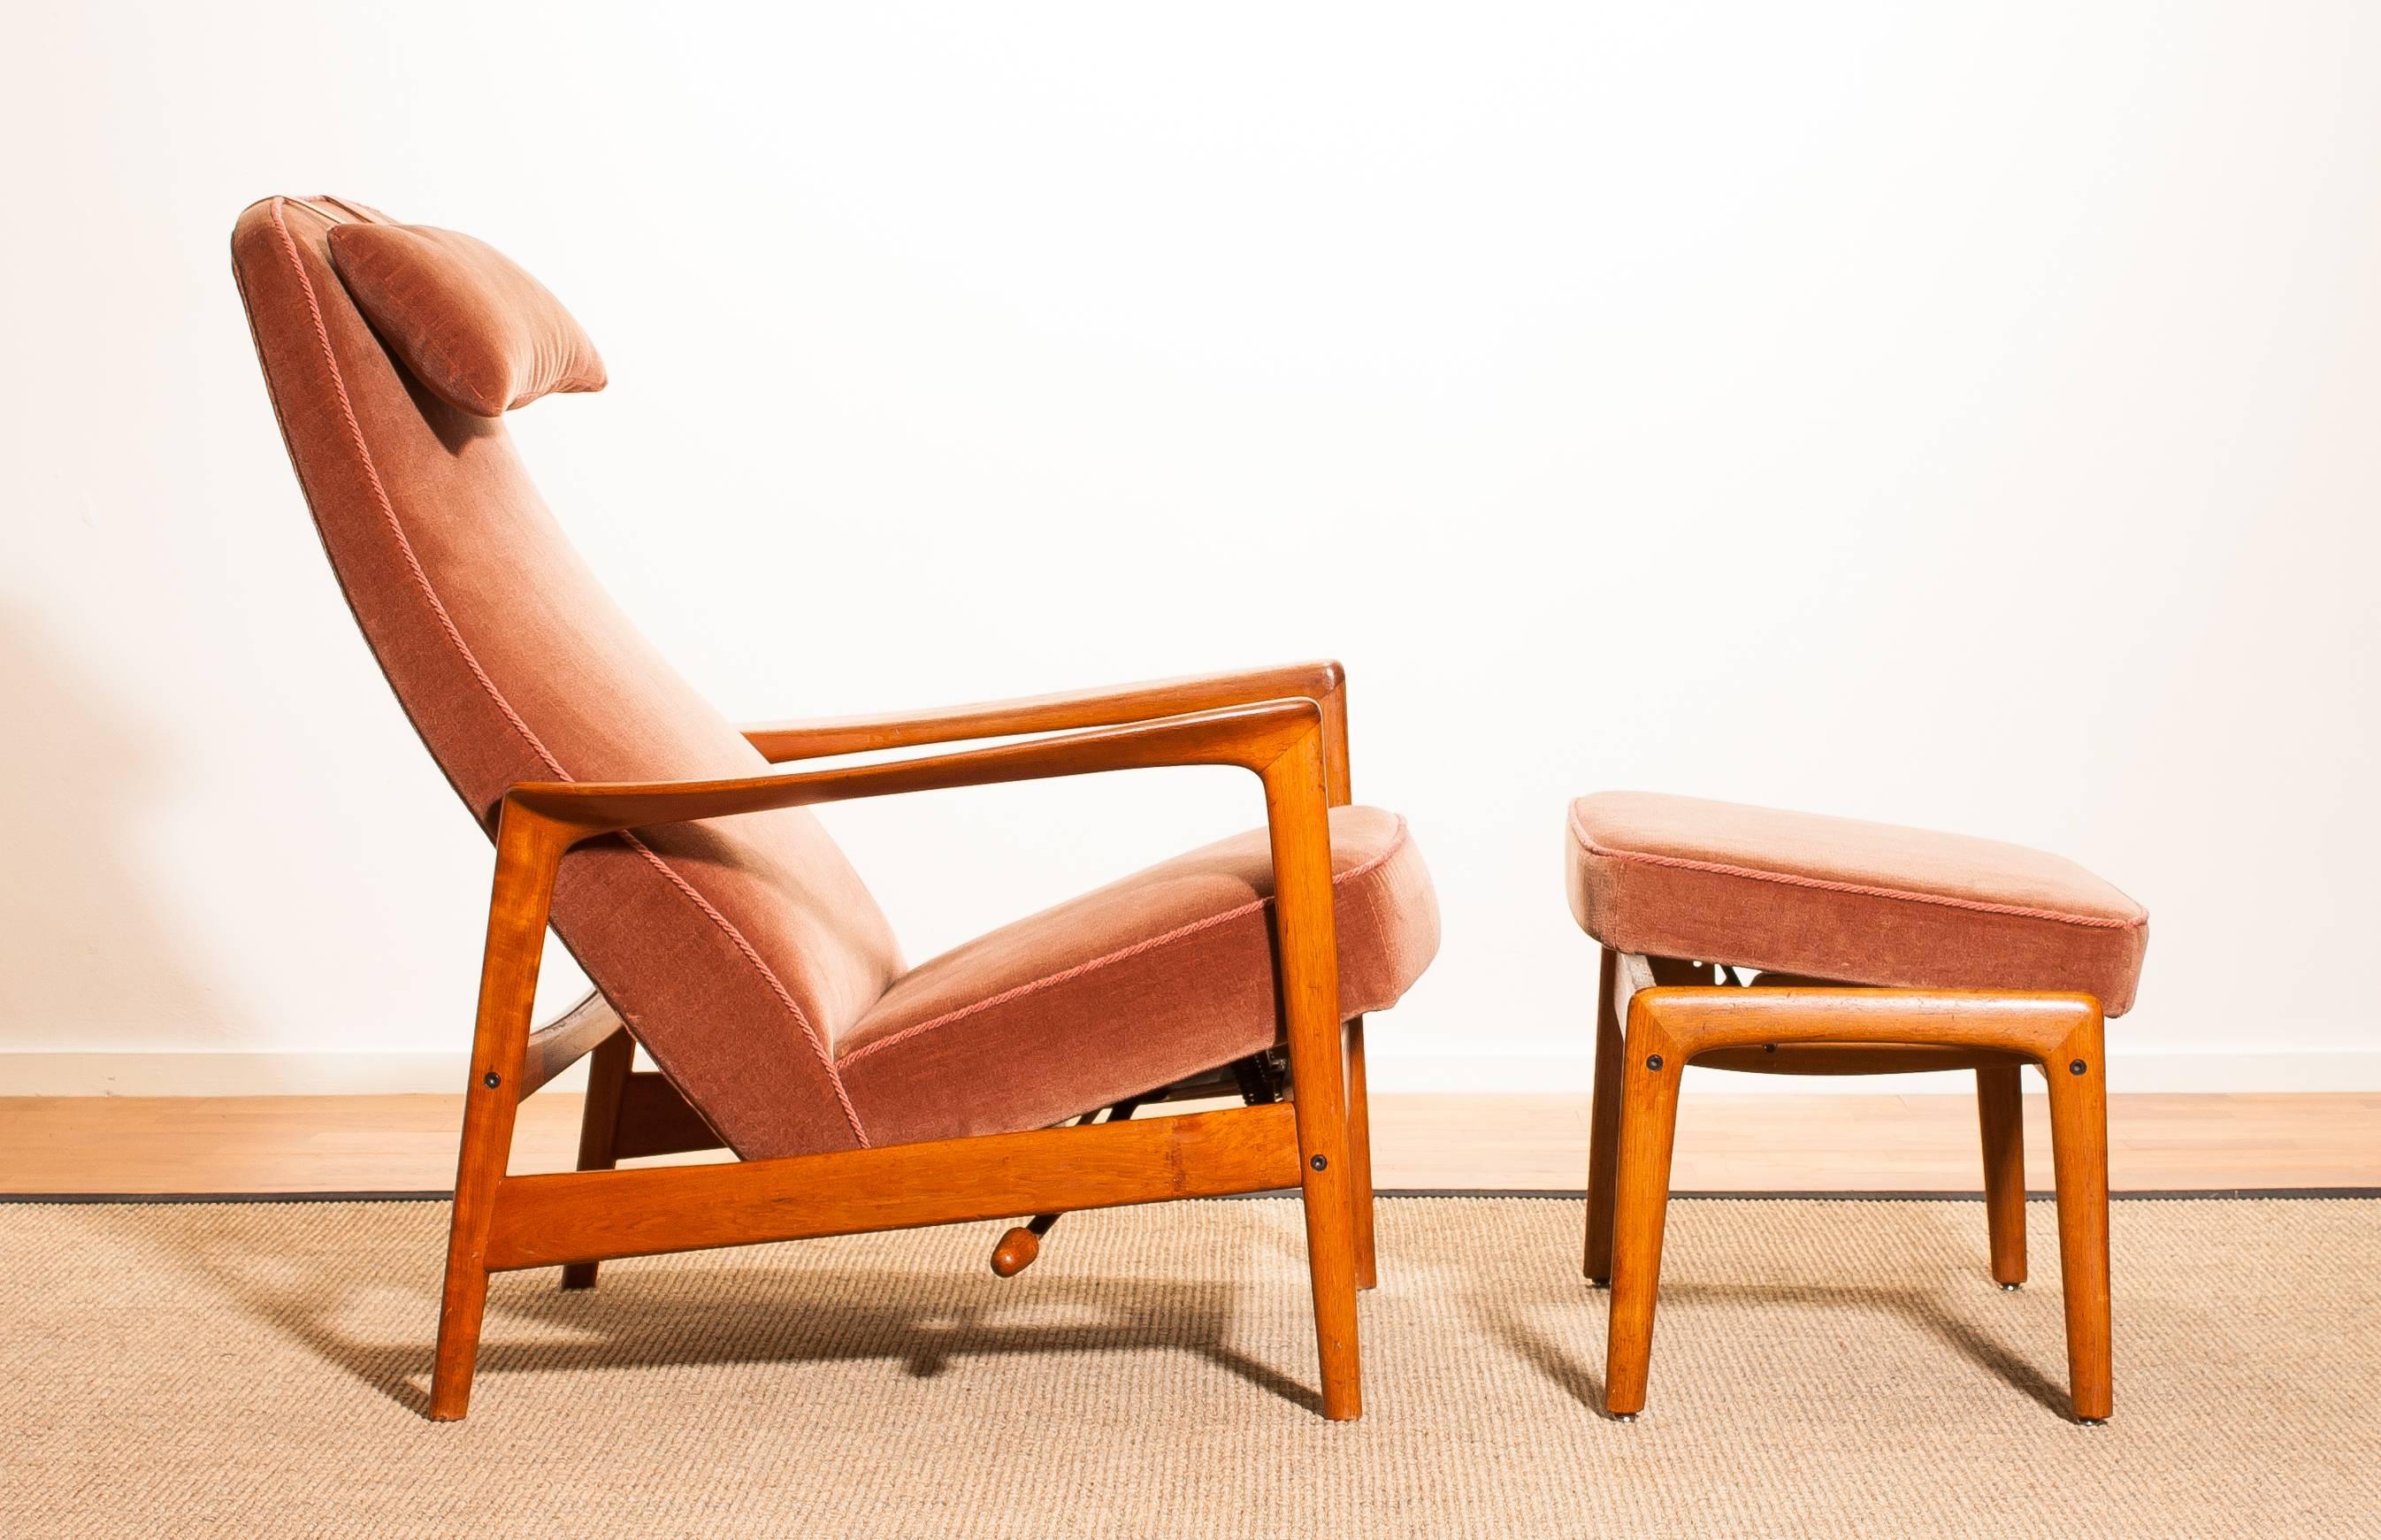 Midcentury teak lounge chair and ottoman designed by Folke Ohlsson for DUX. 
The solid teak frame with the original velours fabric is in mint condition. (Chair and ottoman)
This very comfortable chair with a rocking motion (eight adjustable